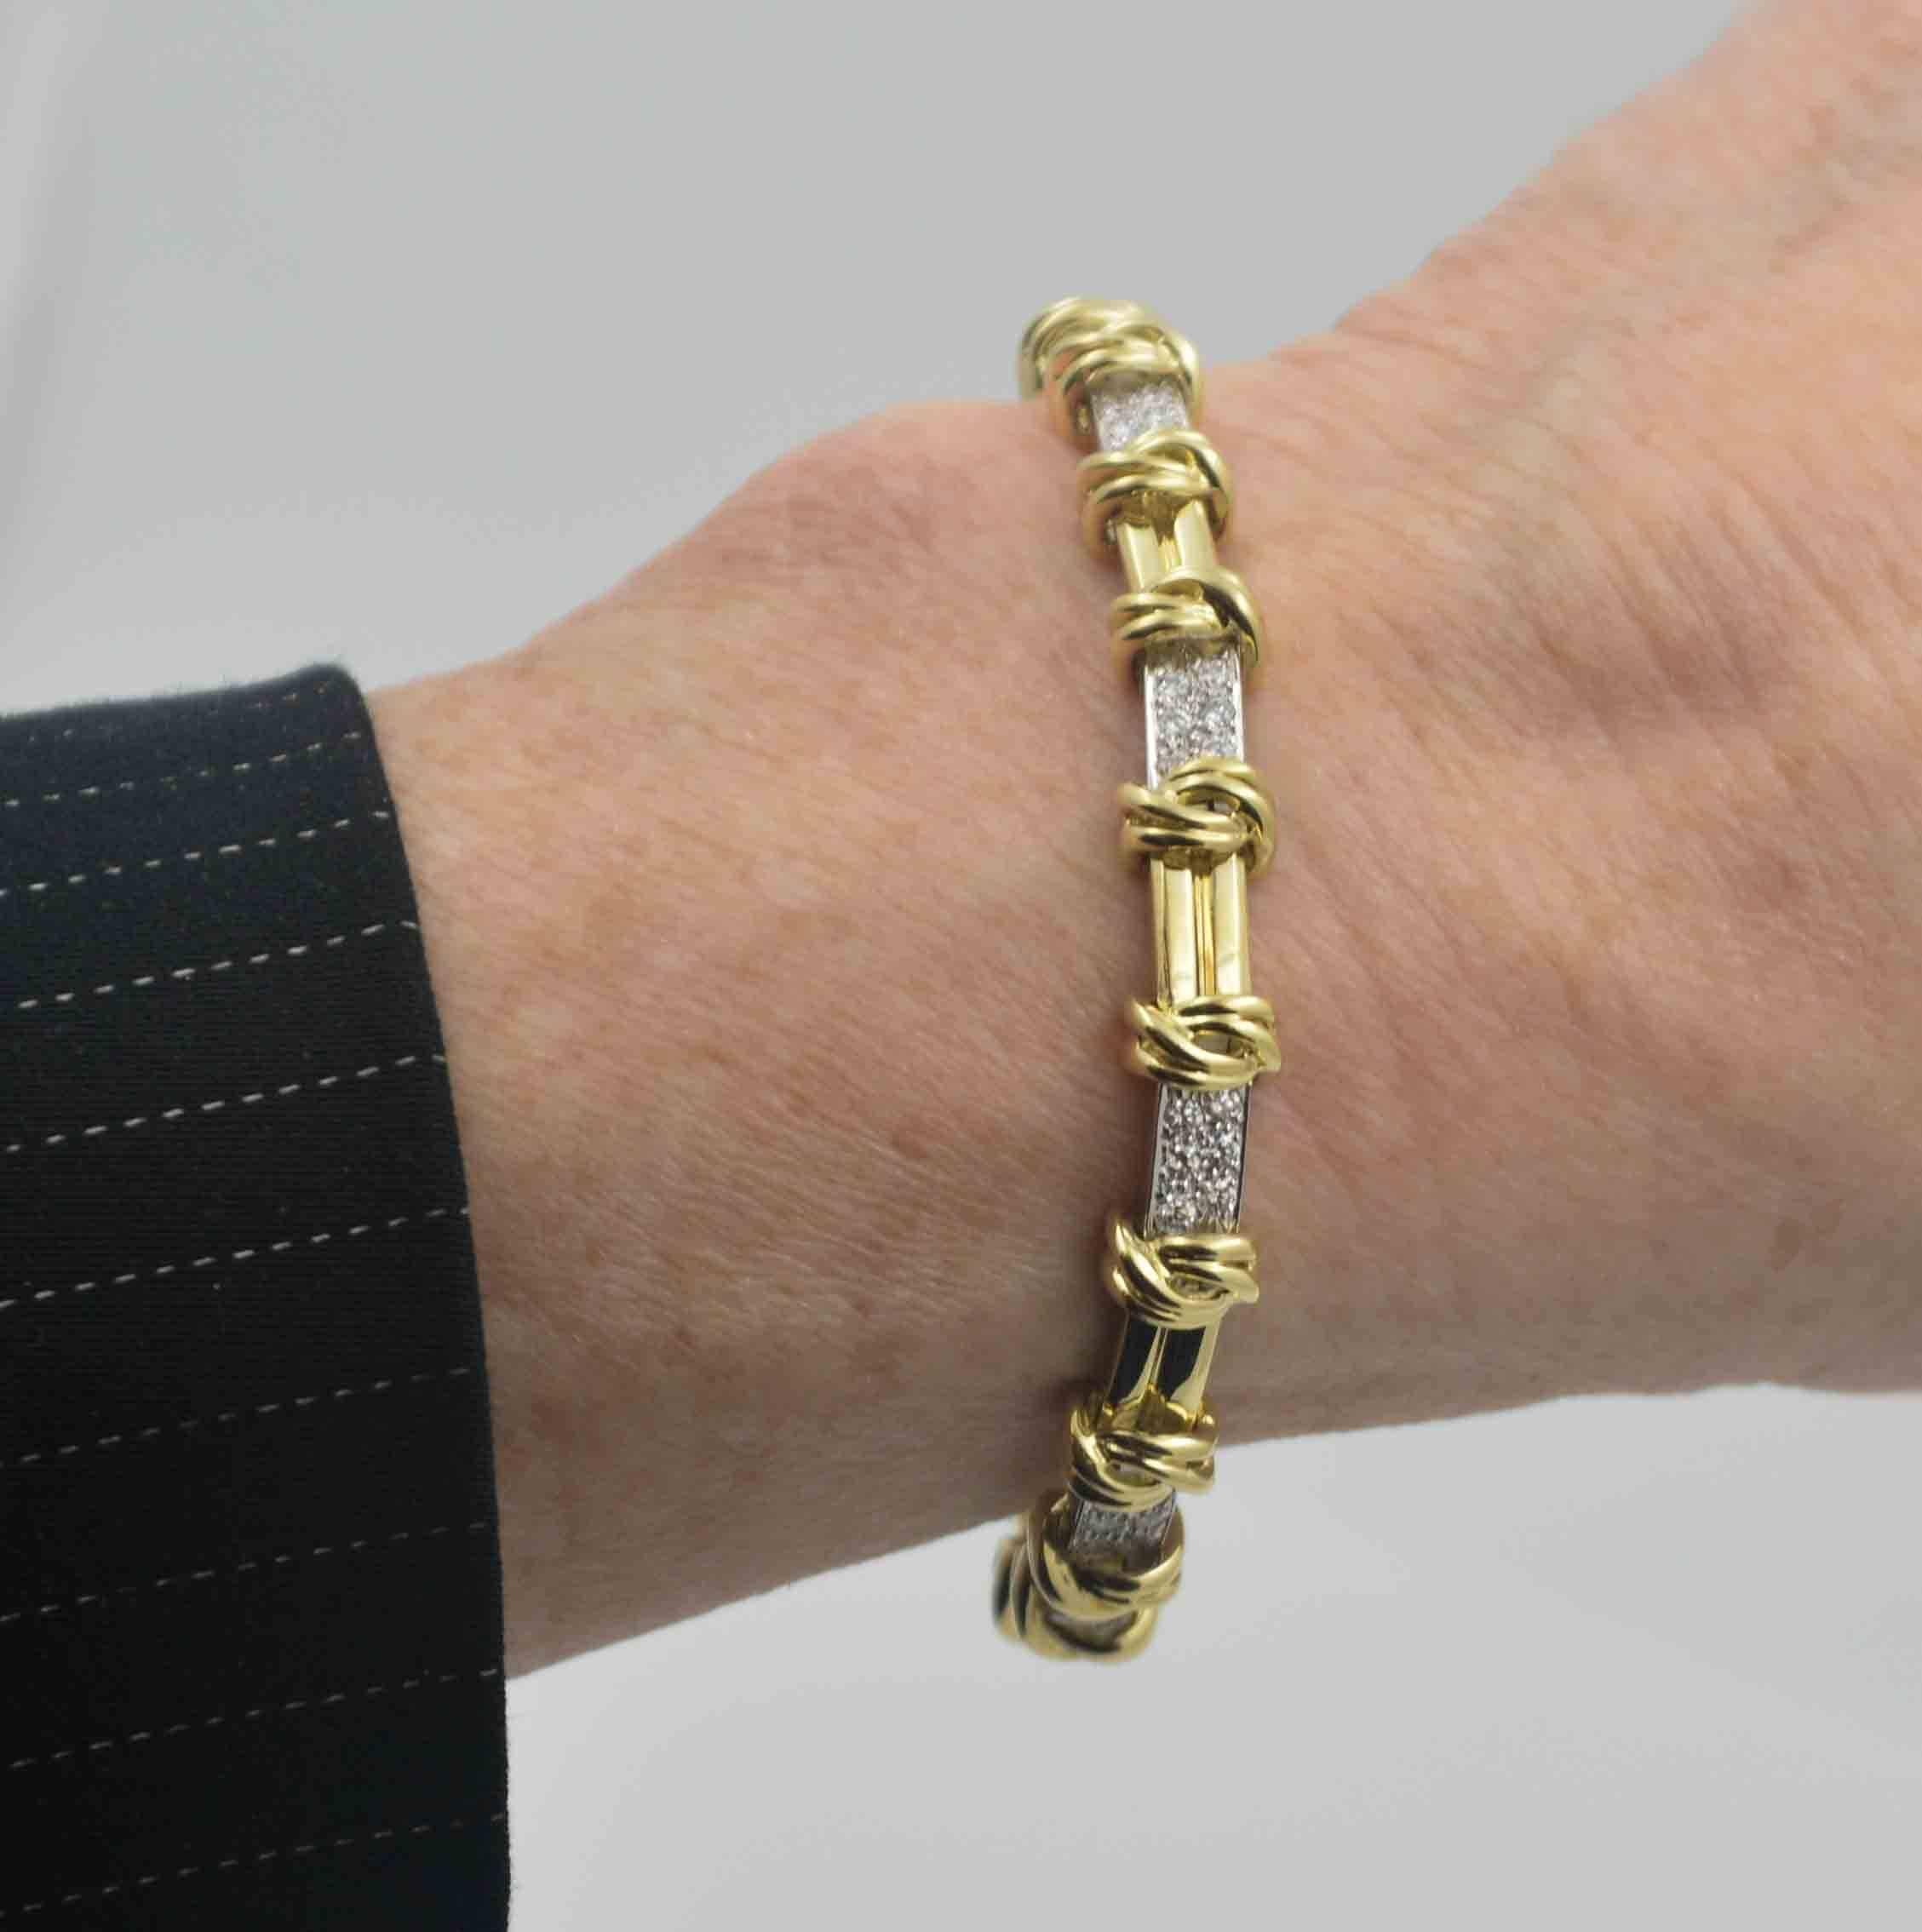 Shimmering around your wrist is a stately platinum, 18 Karat yellow gold and diamond bar and knot link bracelet. This gorgeous bracelet measures 7 inches in length. 48 Round brilliant cut diamonds (1.00 carat, G-H color, VS internal clarity) pave